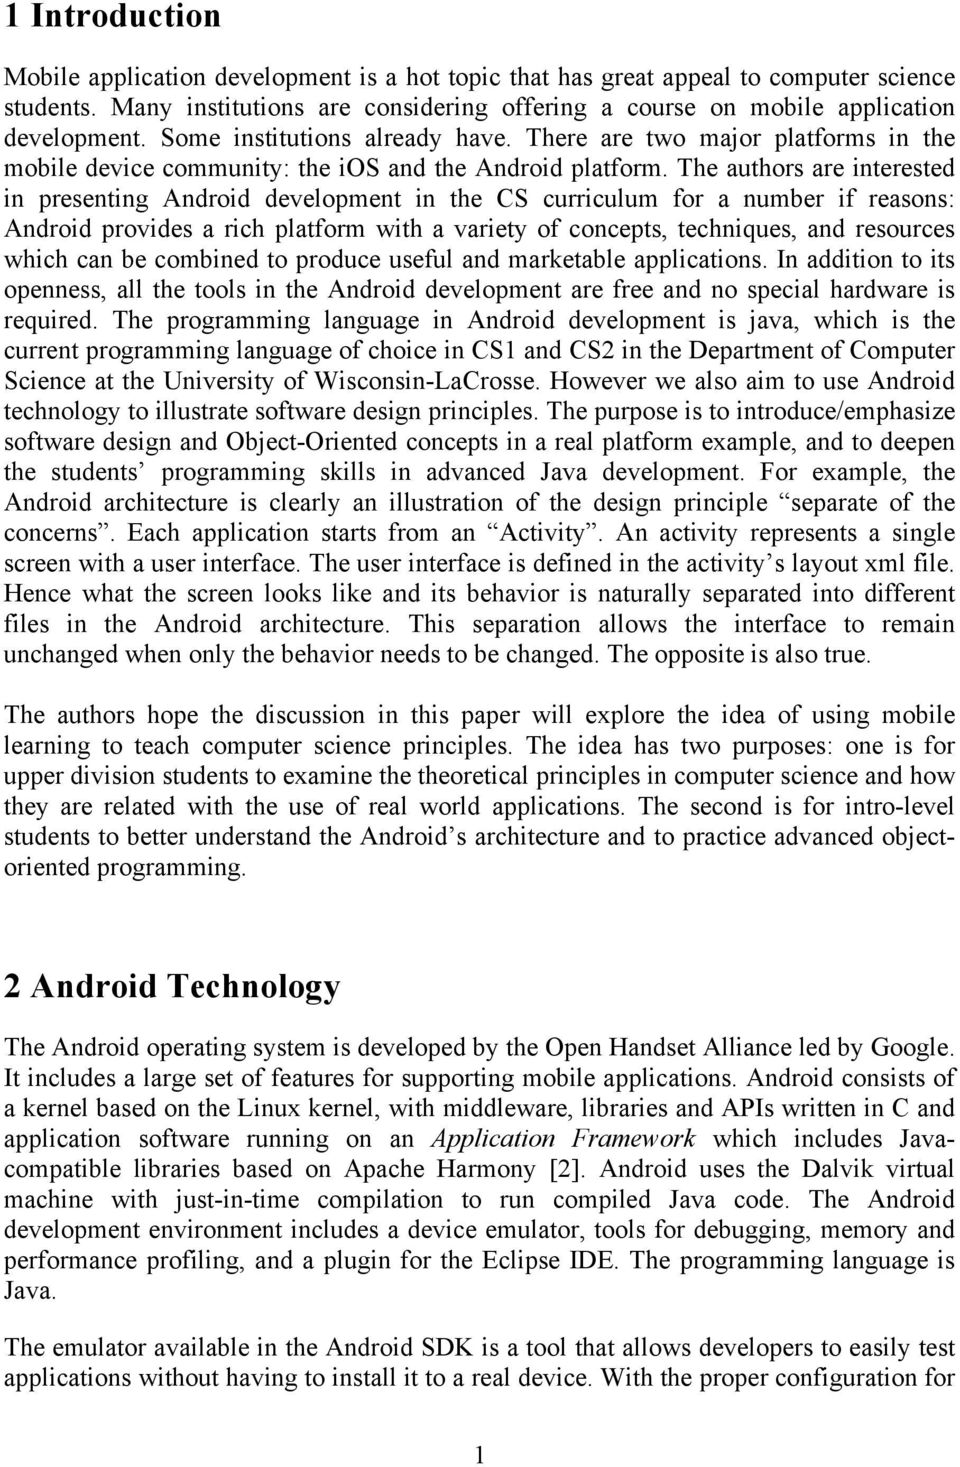 The authors are interested in presenting Android development in the CS curriculum for a number if reasons: Android provides a rich platform with a variety of concepts, techniques, and resources which